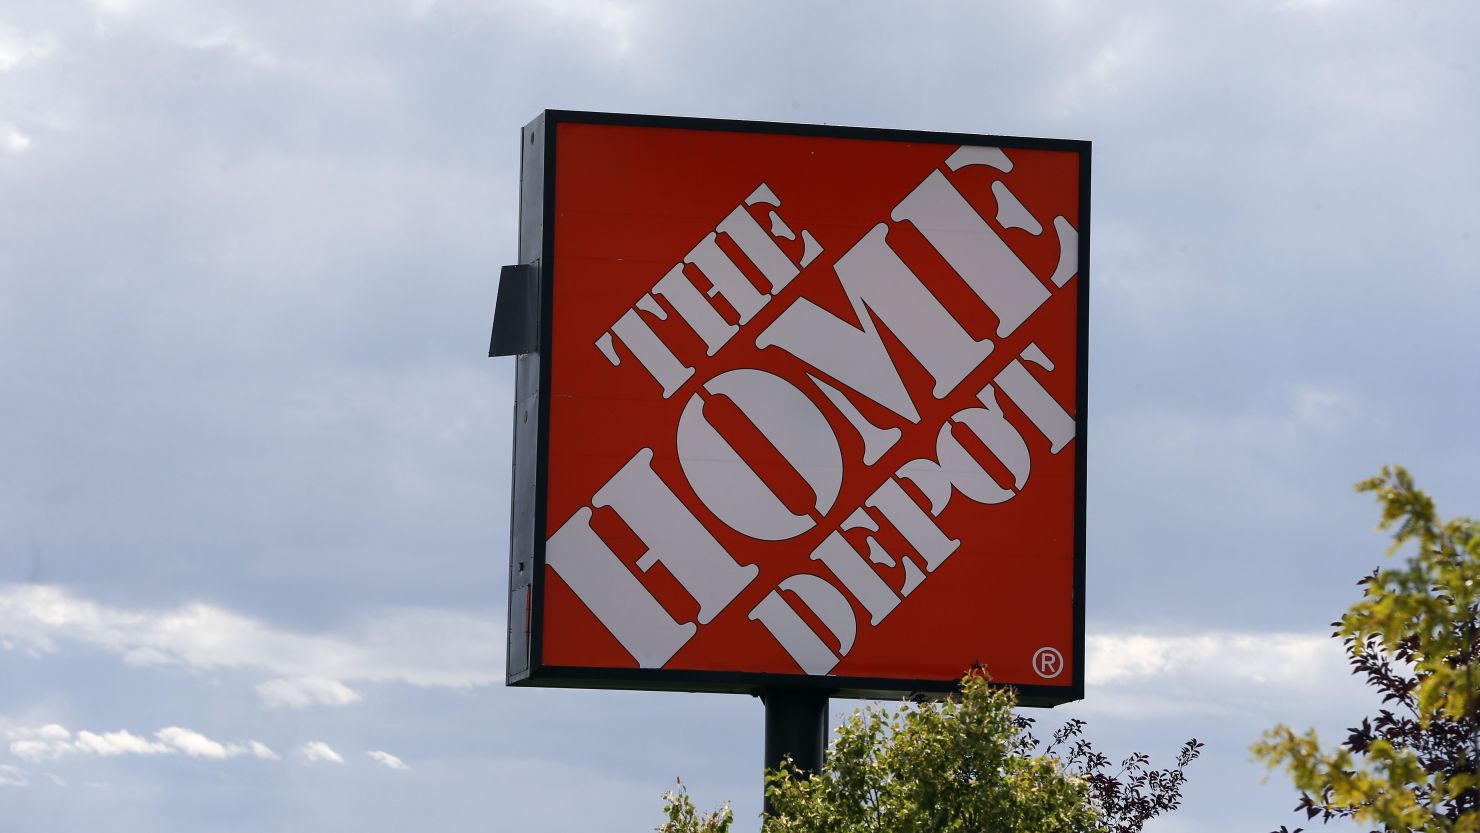 Home Depot broke labor law by firing an employee with 'BLM' on